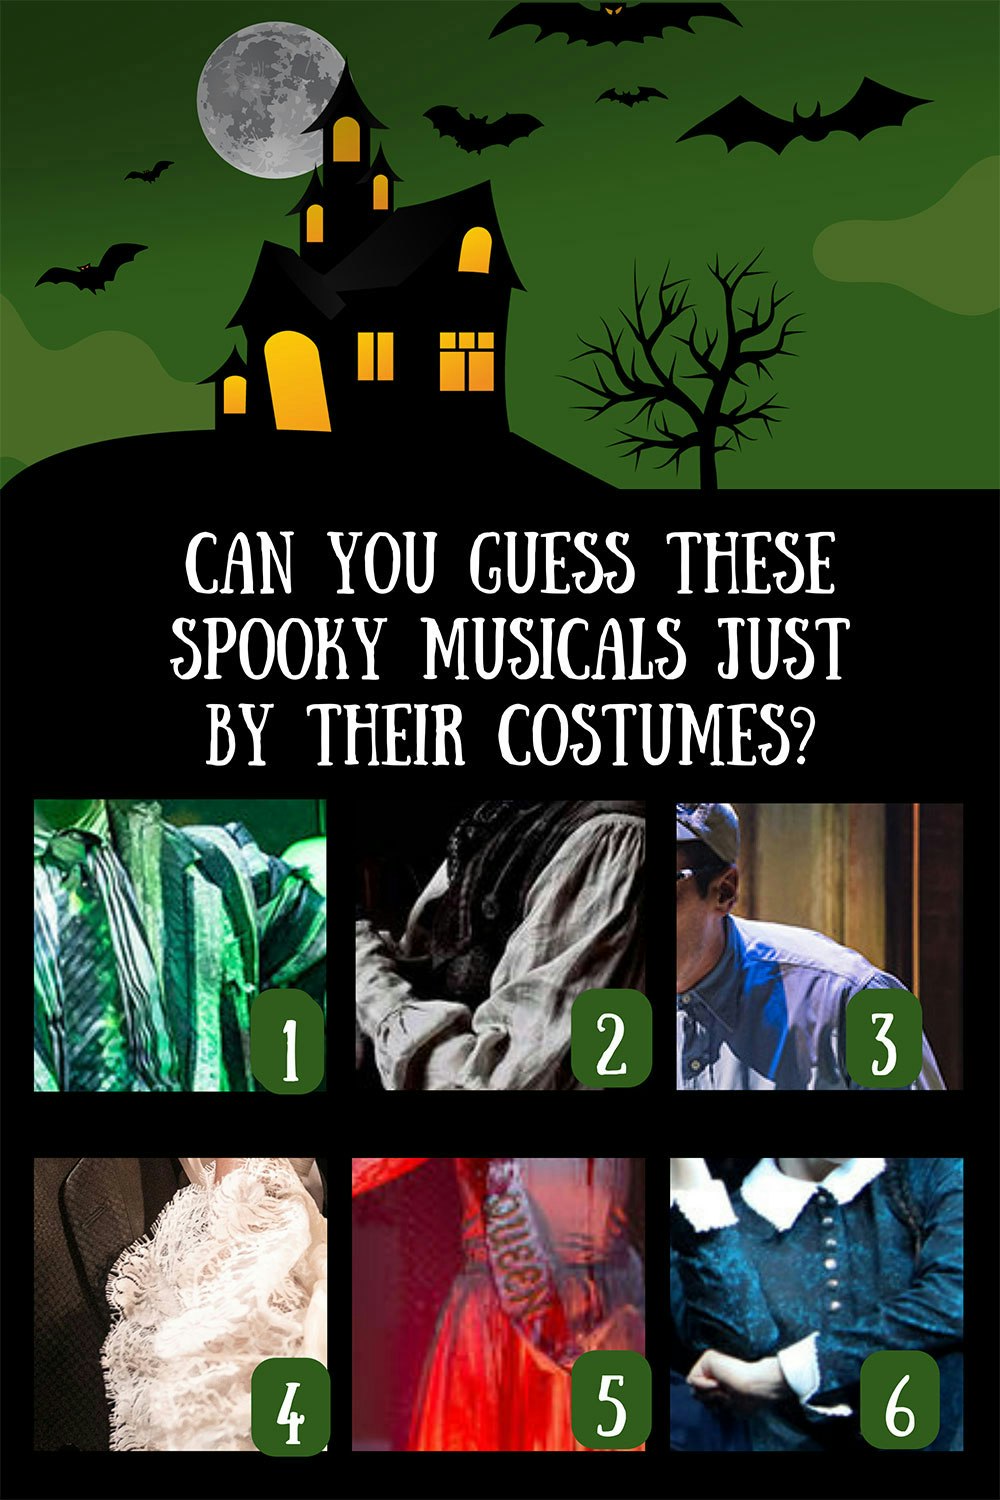 Can you guess these spooky musicals just by their costumes?